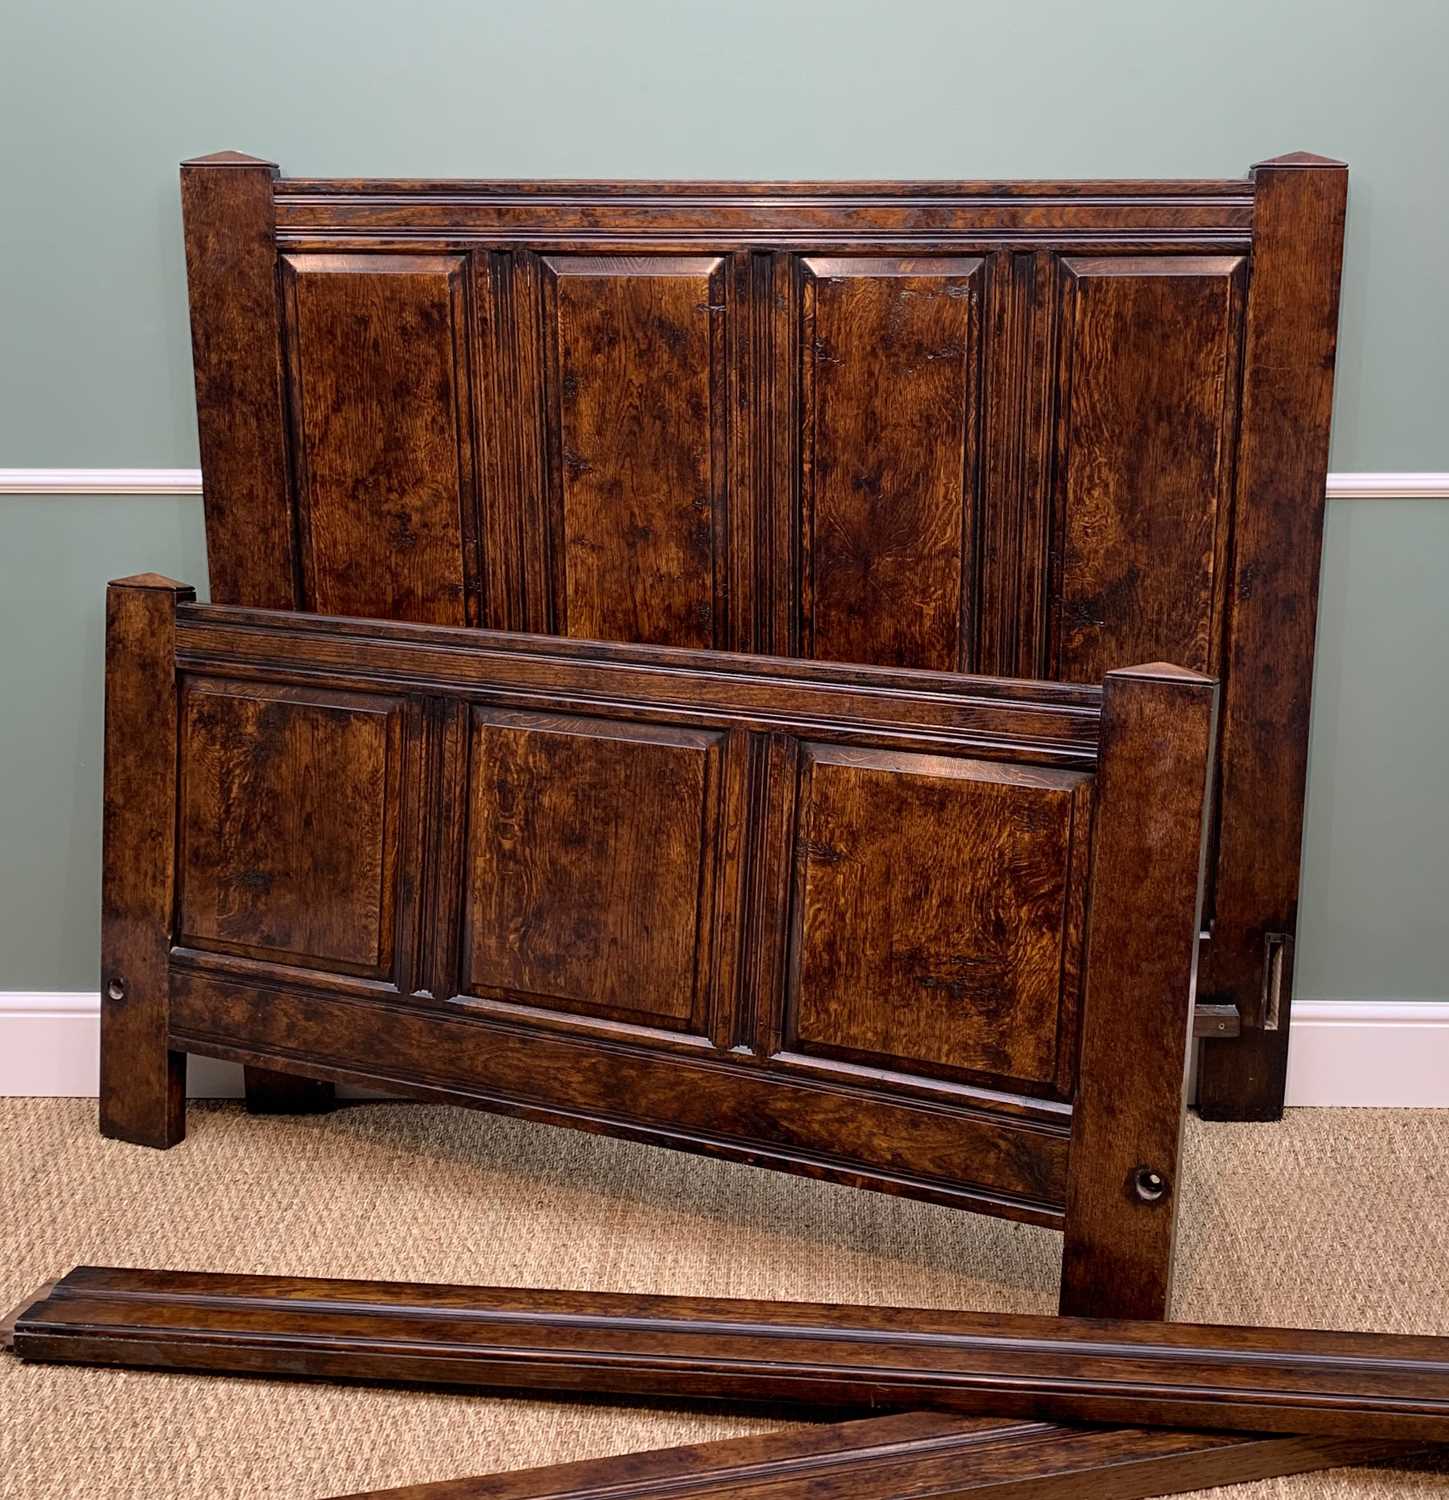 BYLAW REPRODUCTION STAINED OAK PANELLED DOUBLE BED in the 17th Century style, head board, foot board